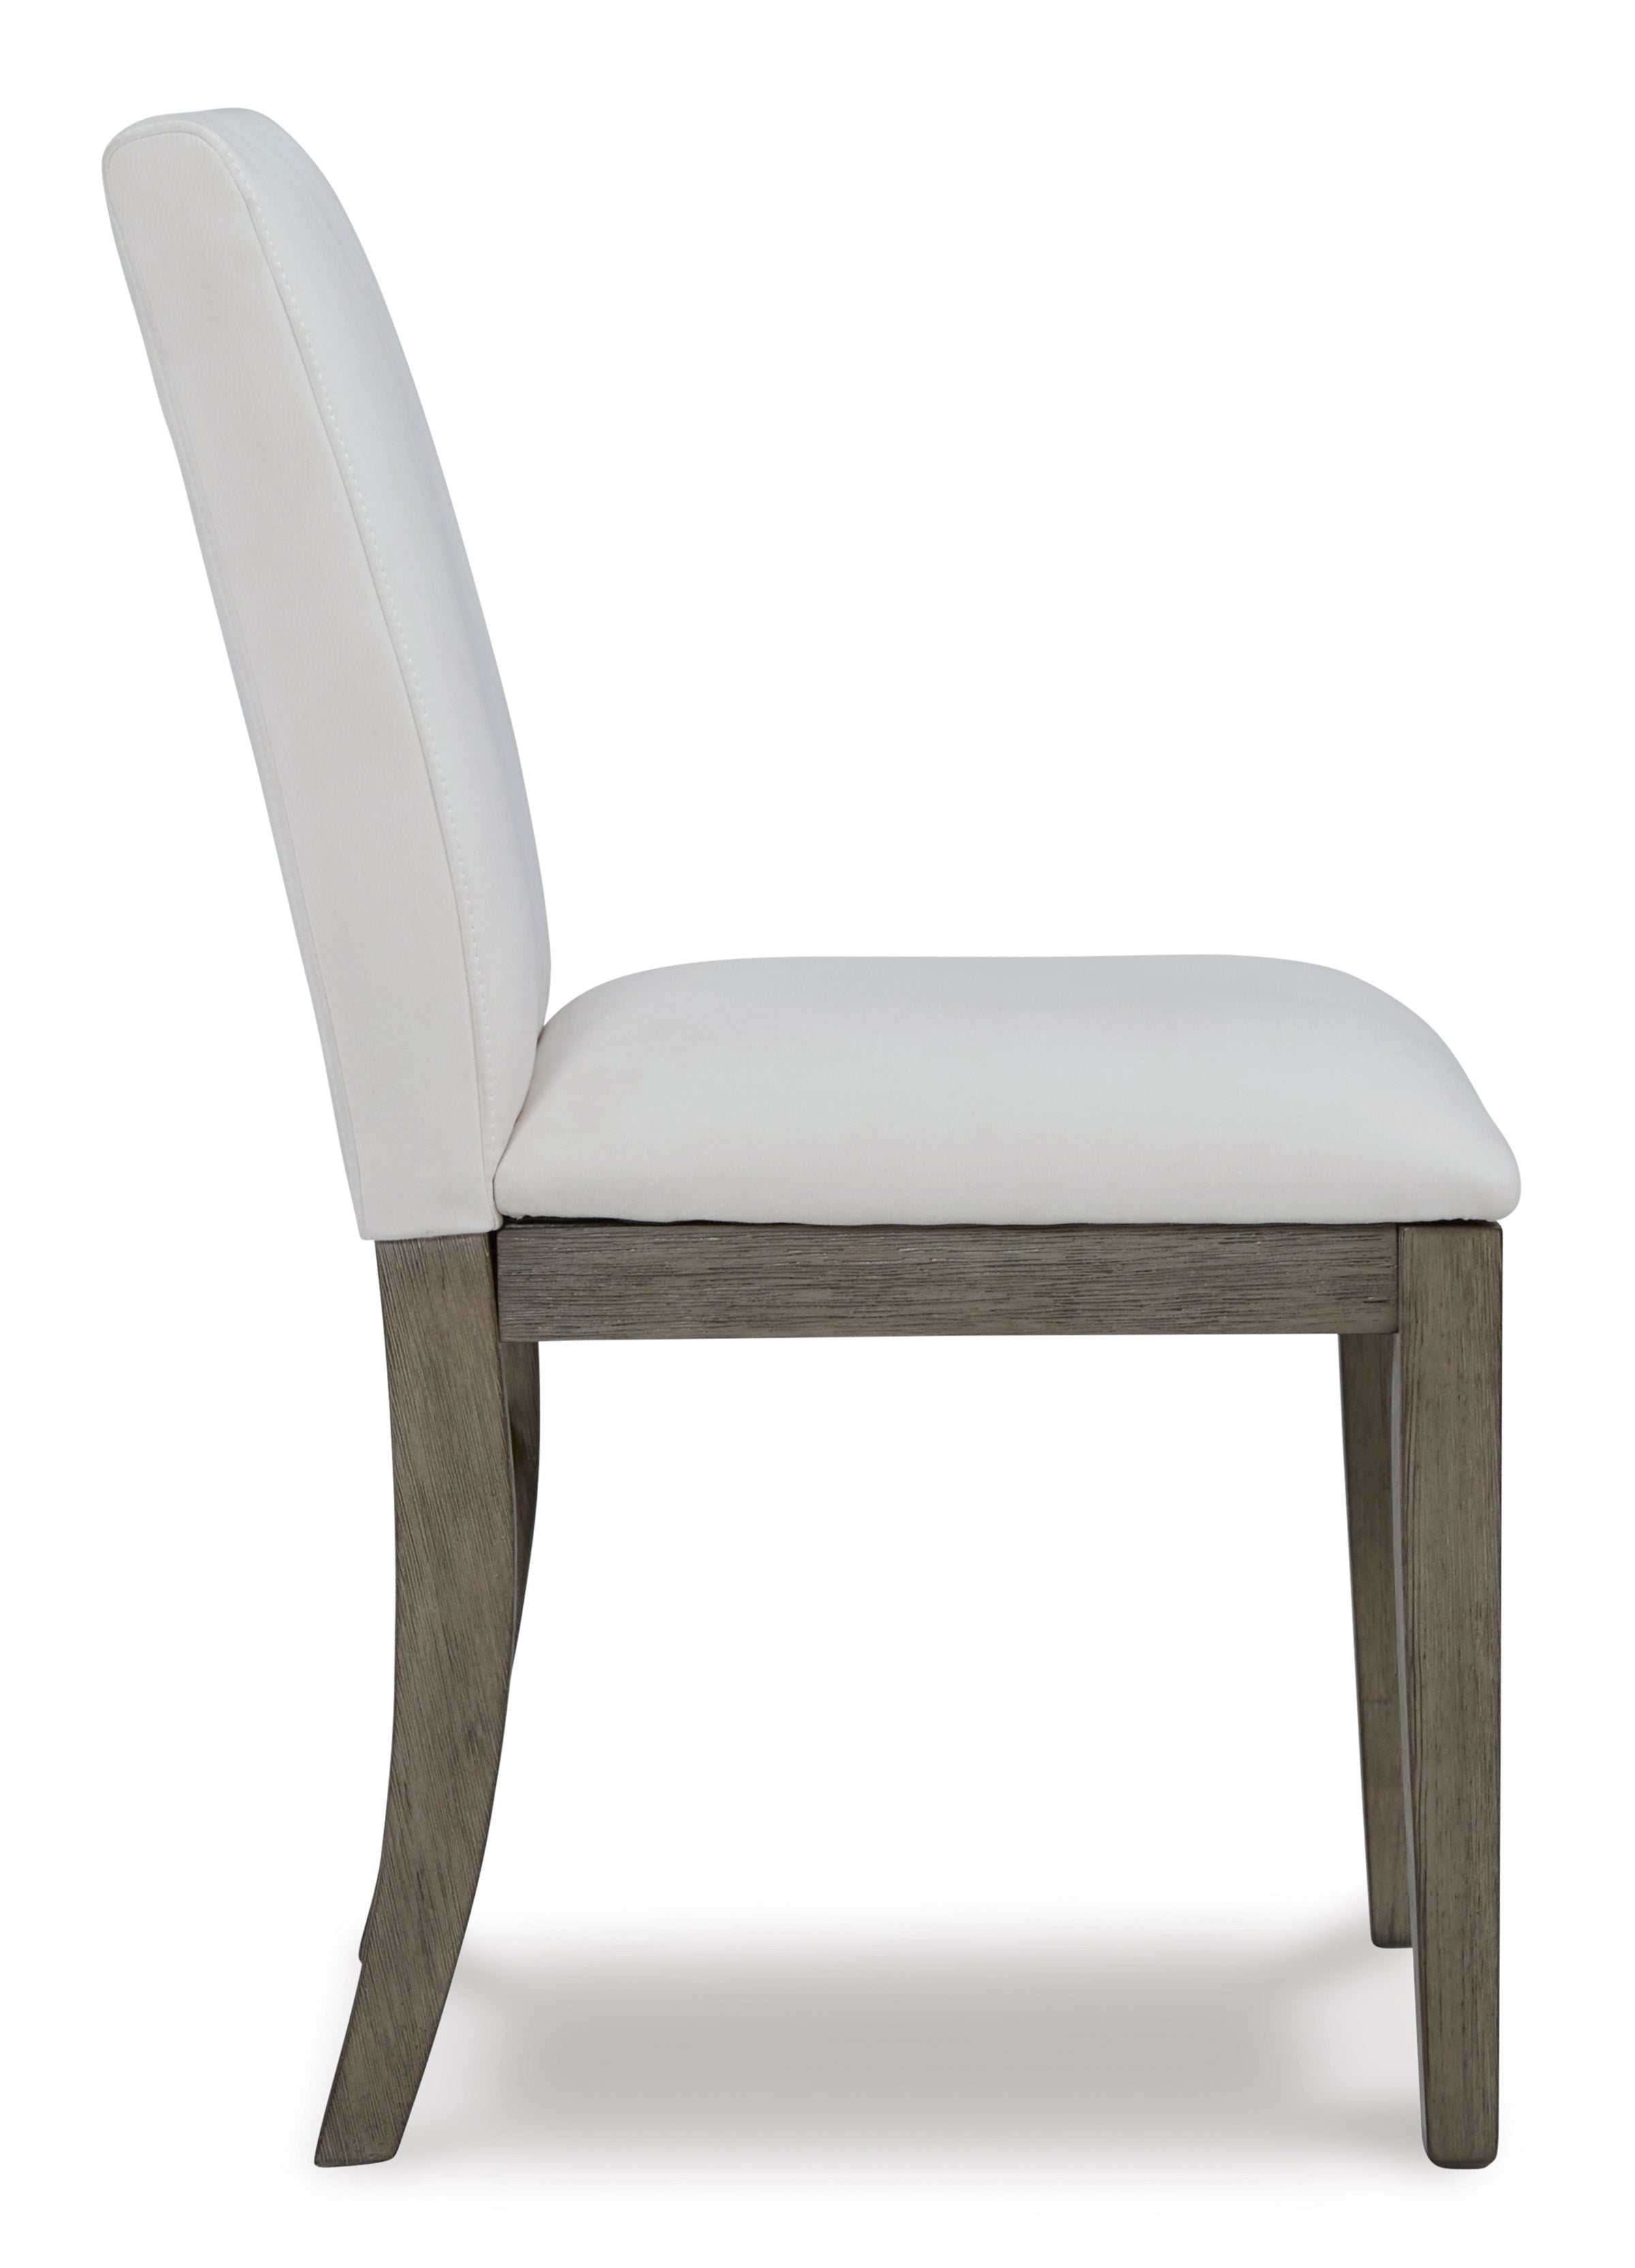 Anibecca Gray & Off White Dining Chair (Set of 2)